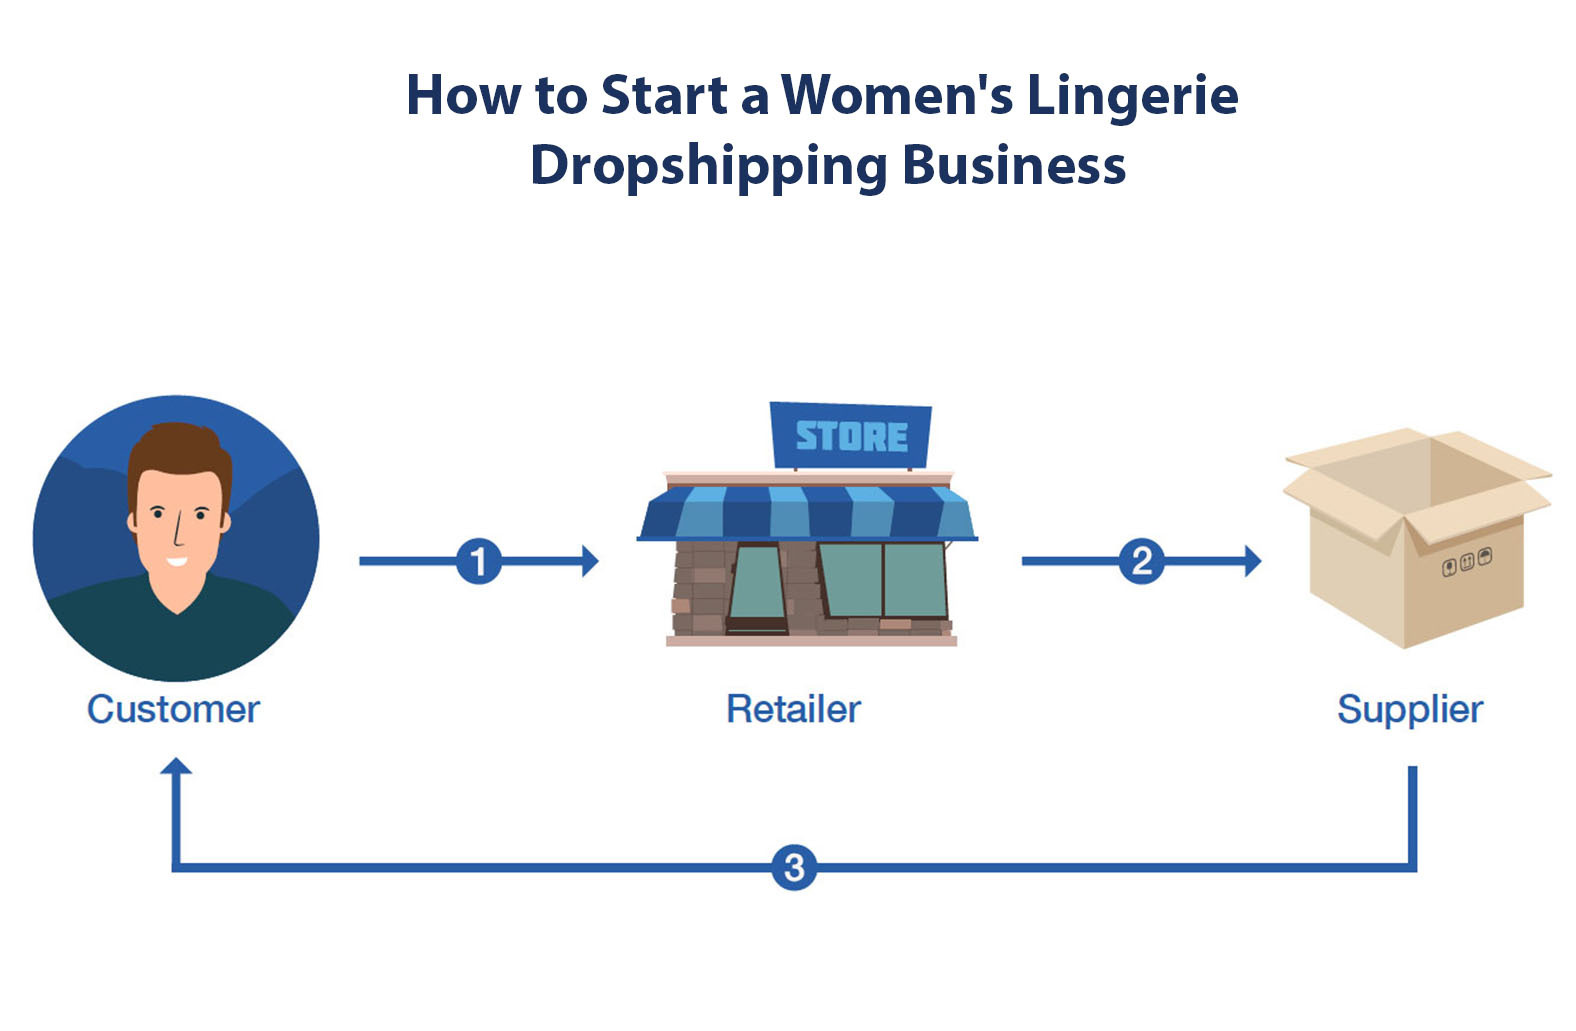 How to Start a Women's Lingerie Dropshipping Business